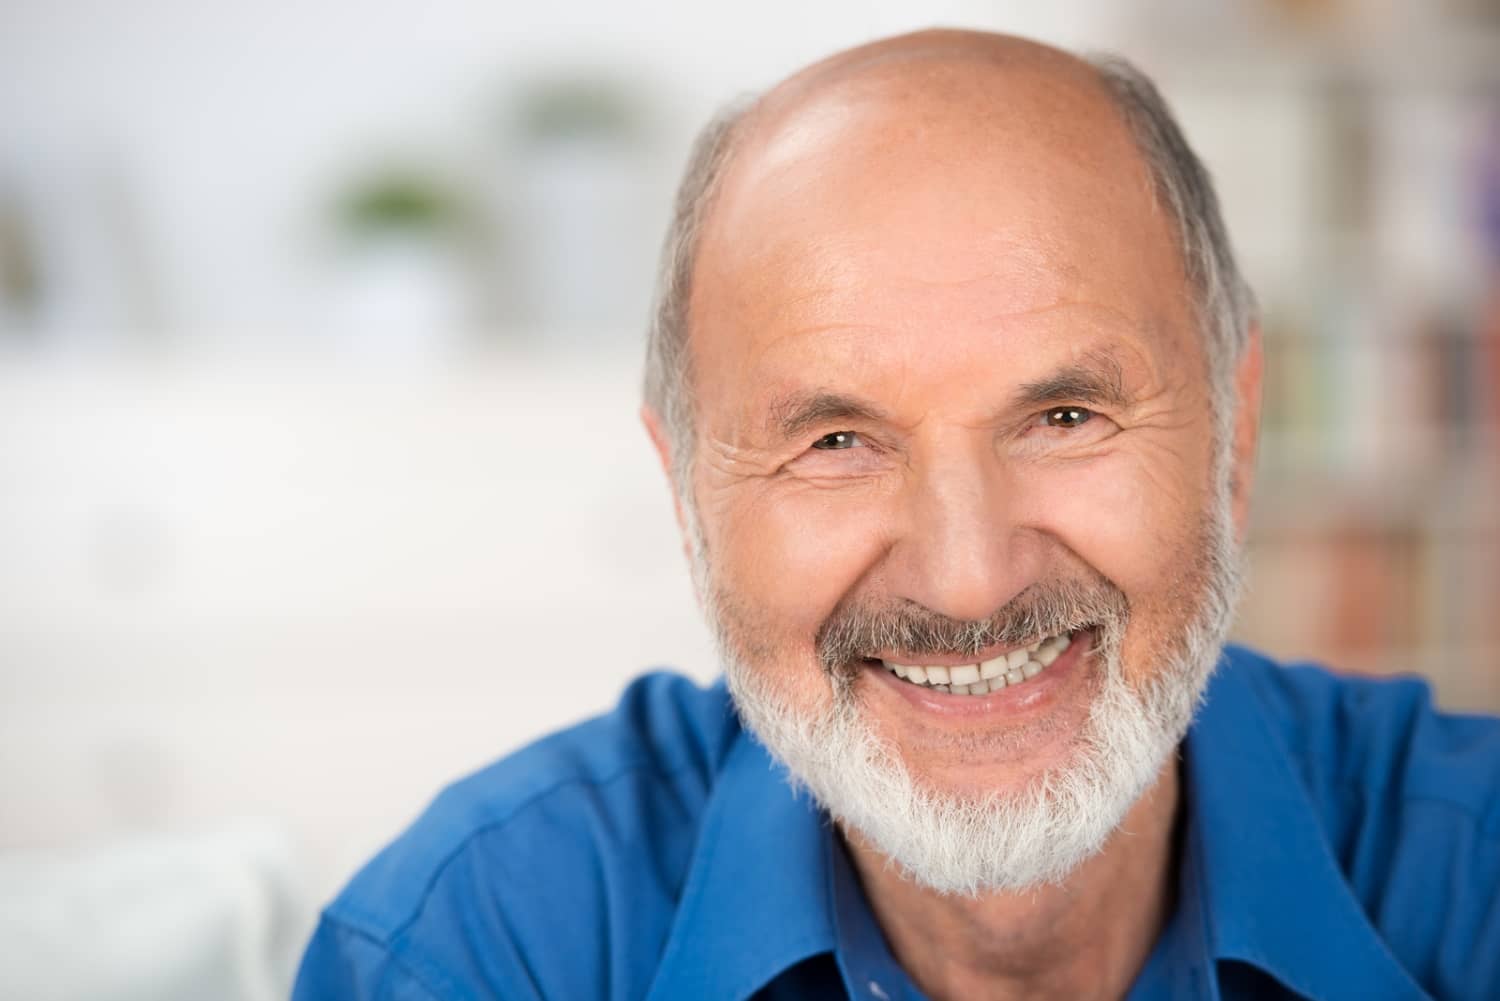 4 tips for living with new partial dentures